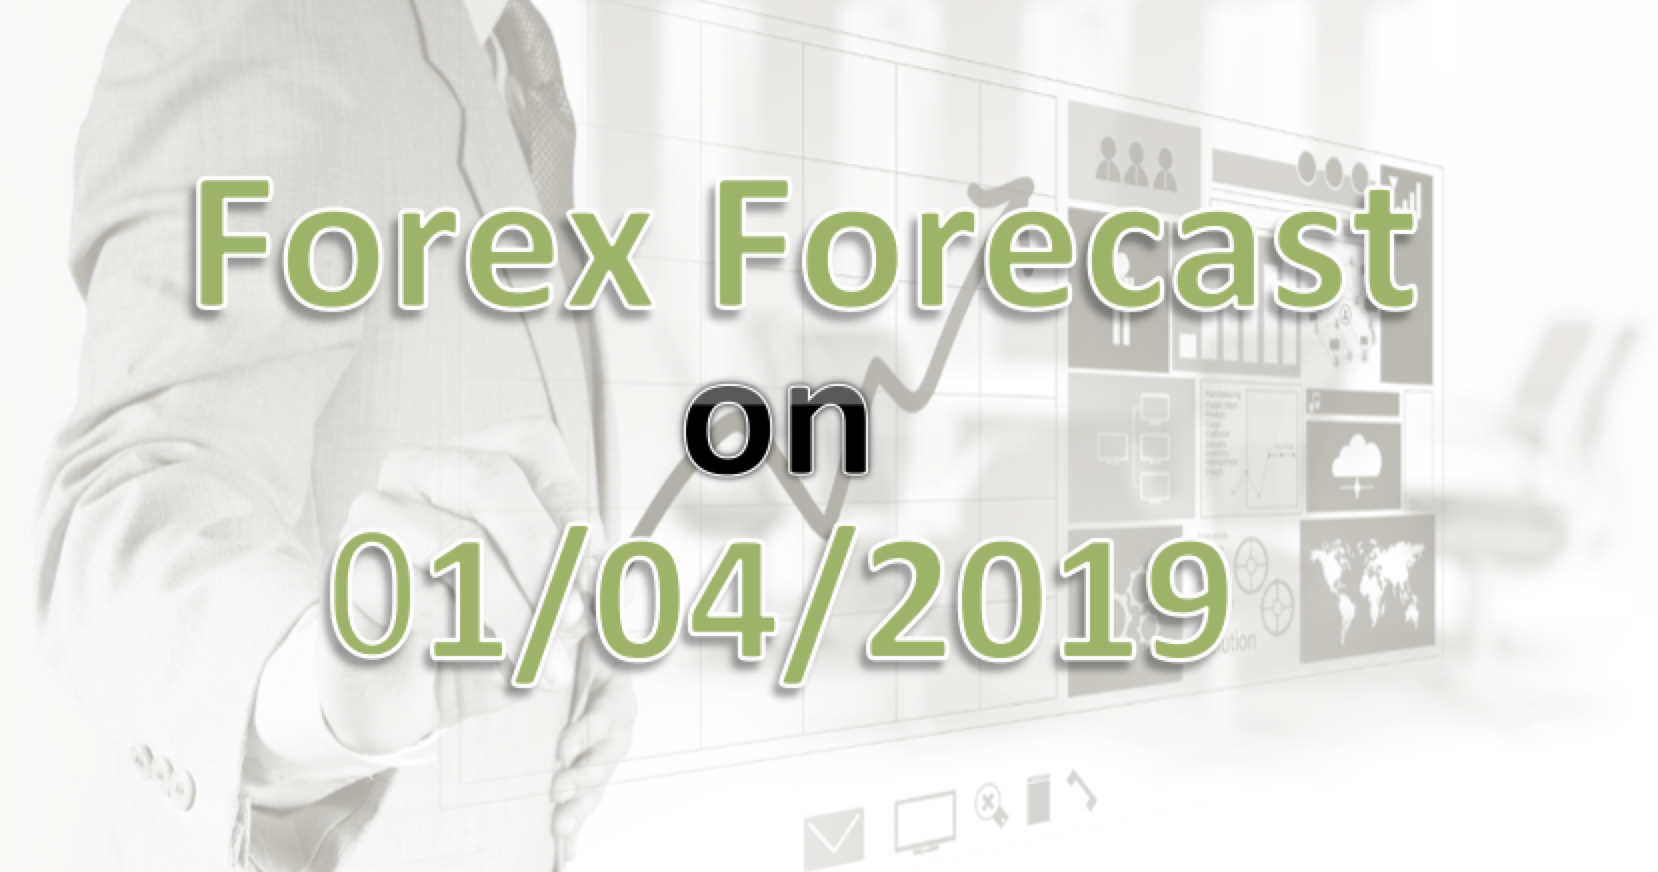 Forecast on 1/04/2019 – USDJPY bulled up to a rate 111.00 as a result of positive China PMI